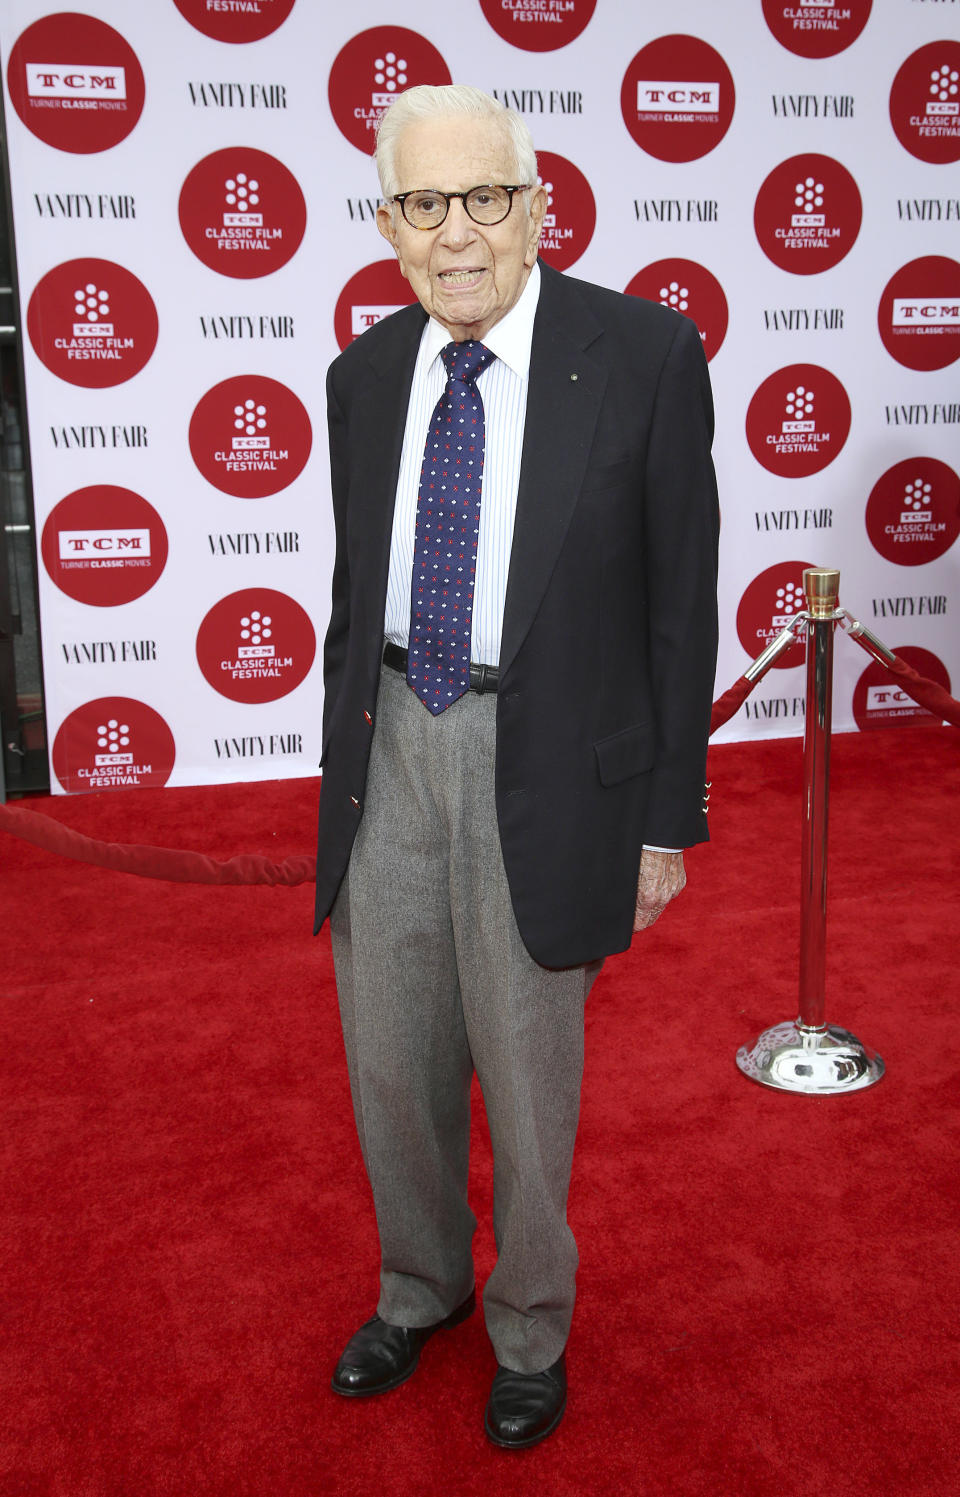 FILE - Walter Mirisch arrives at 2014 TCM Classic Film Festival's Opening Night Gala at the TCL Chinese Theatre on April 10, 2014, in Los Angeles. Mirisch, the astute and Oscar winning film producer who oversaw such classics as “Some Like It Hot,” “West Side Story” and “In the Heat of the Night,” has died of natural causes, the Academy of Motion Picture Arts and Sciences said Saturday, Feb. 25, 2023. He was 101. (Photo by Annie I. Bang/Invision/AP, File)